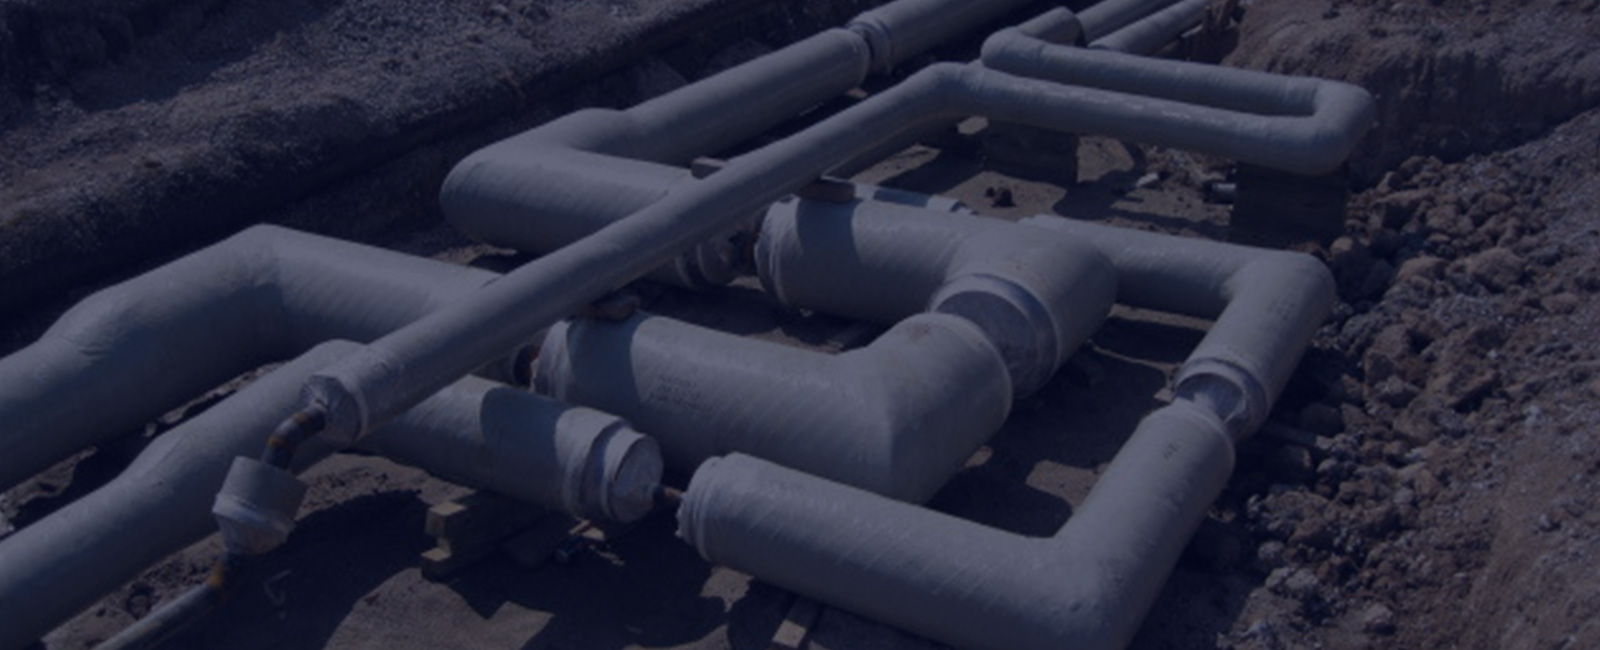 containment piping systems